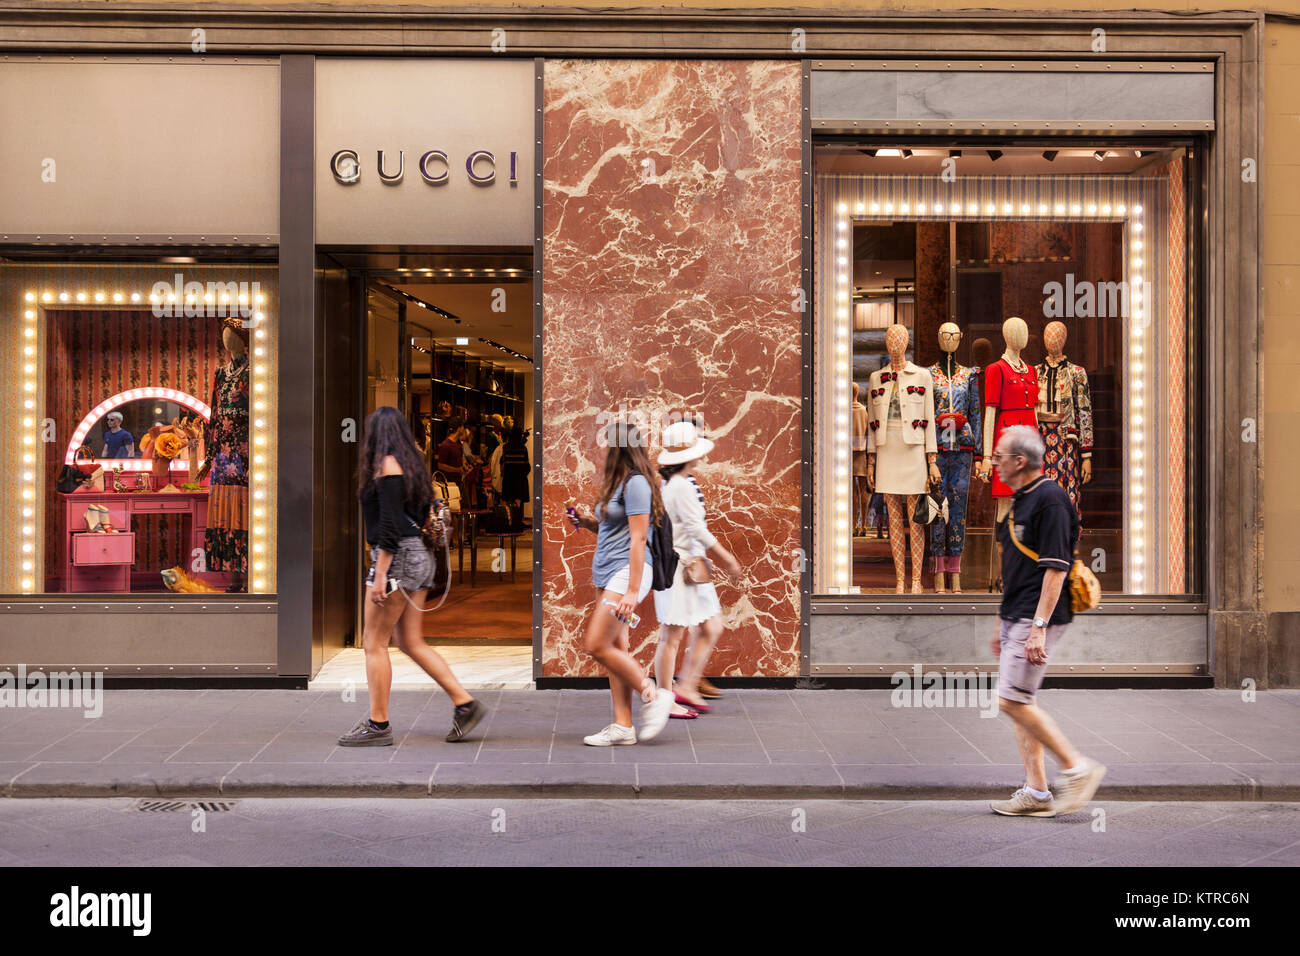 Gucci Italy High Resolution Stock Photography and Images - Alamy